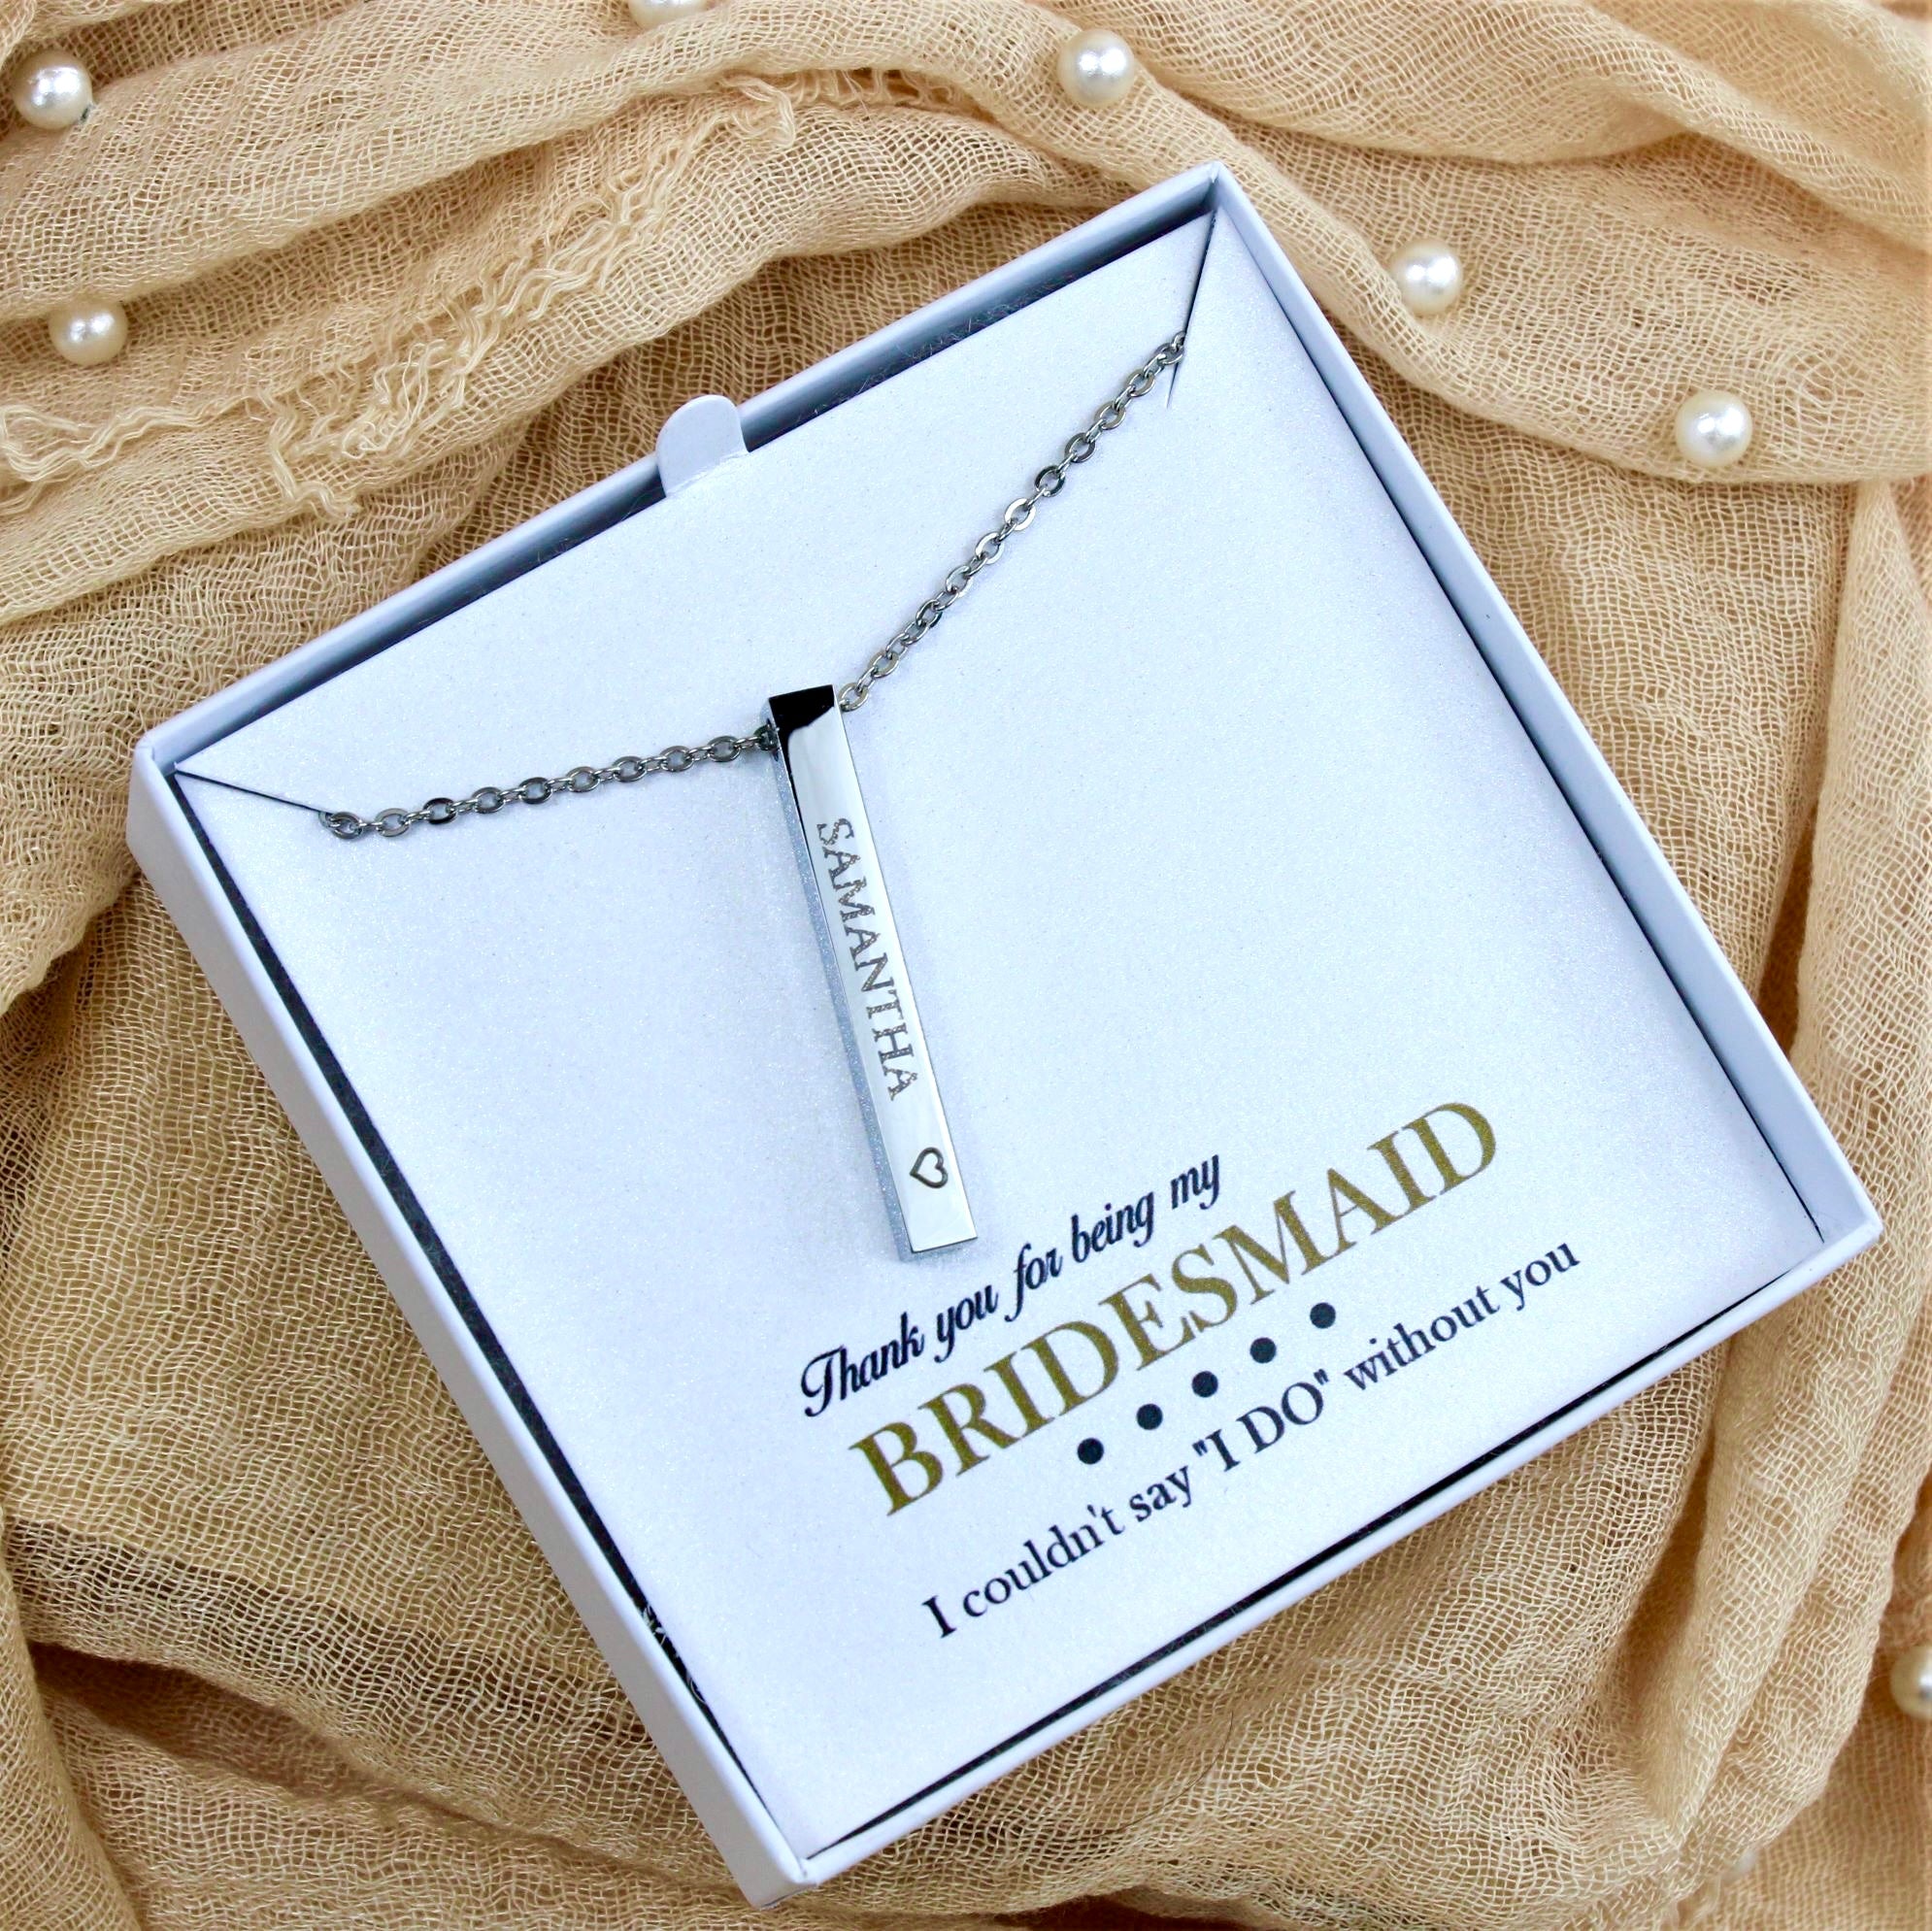 Bridesmaid Gifts Personalized Necklace Engraved Pendant Necklace